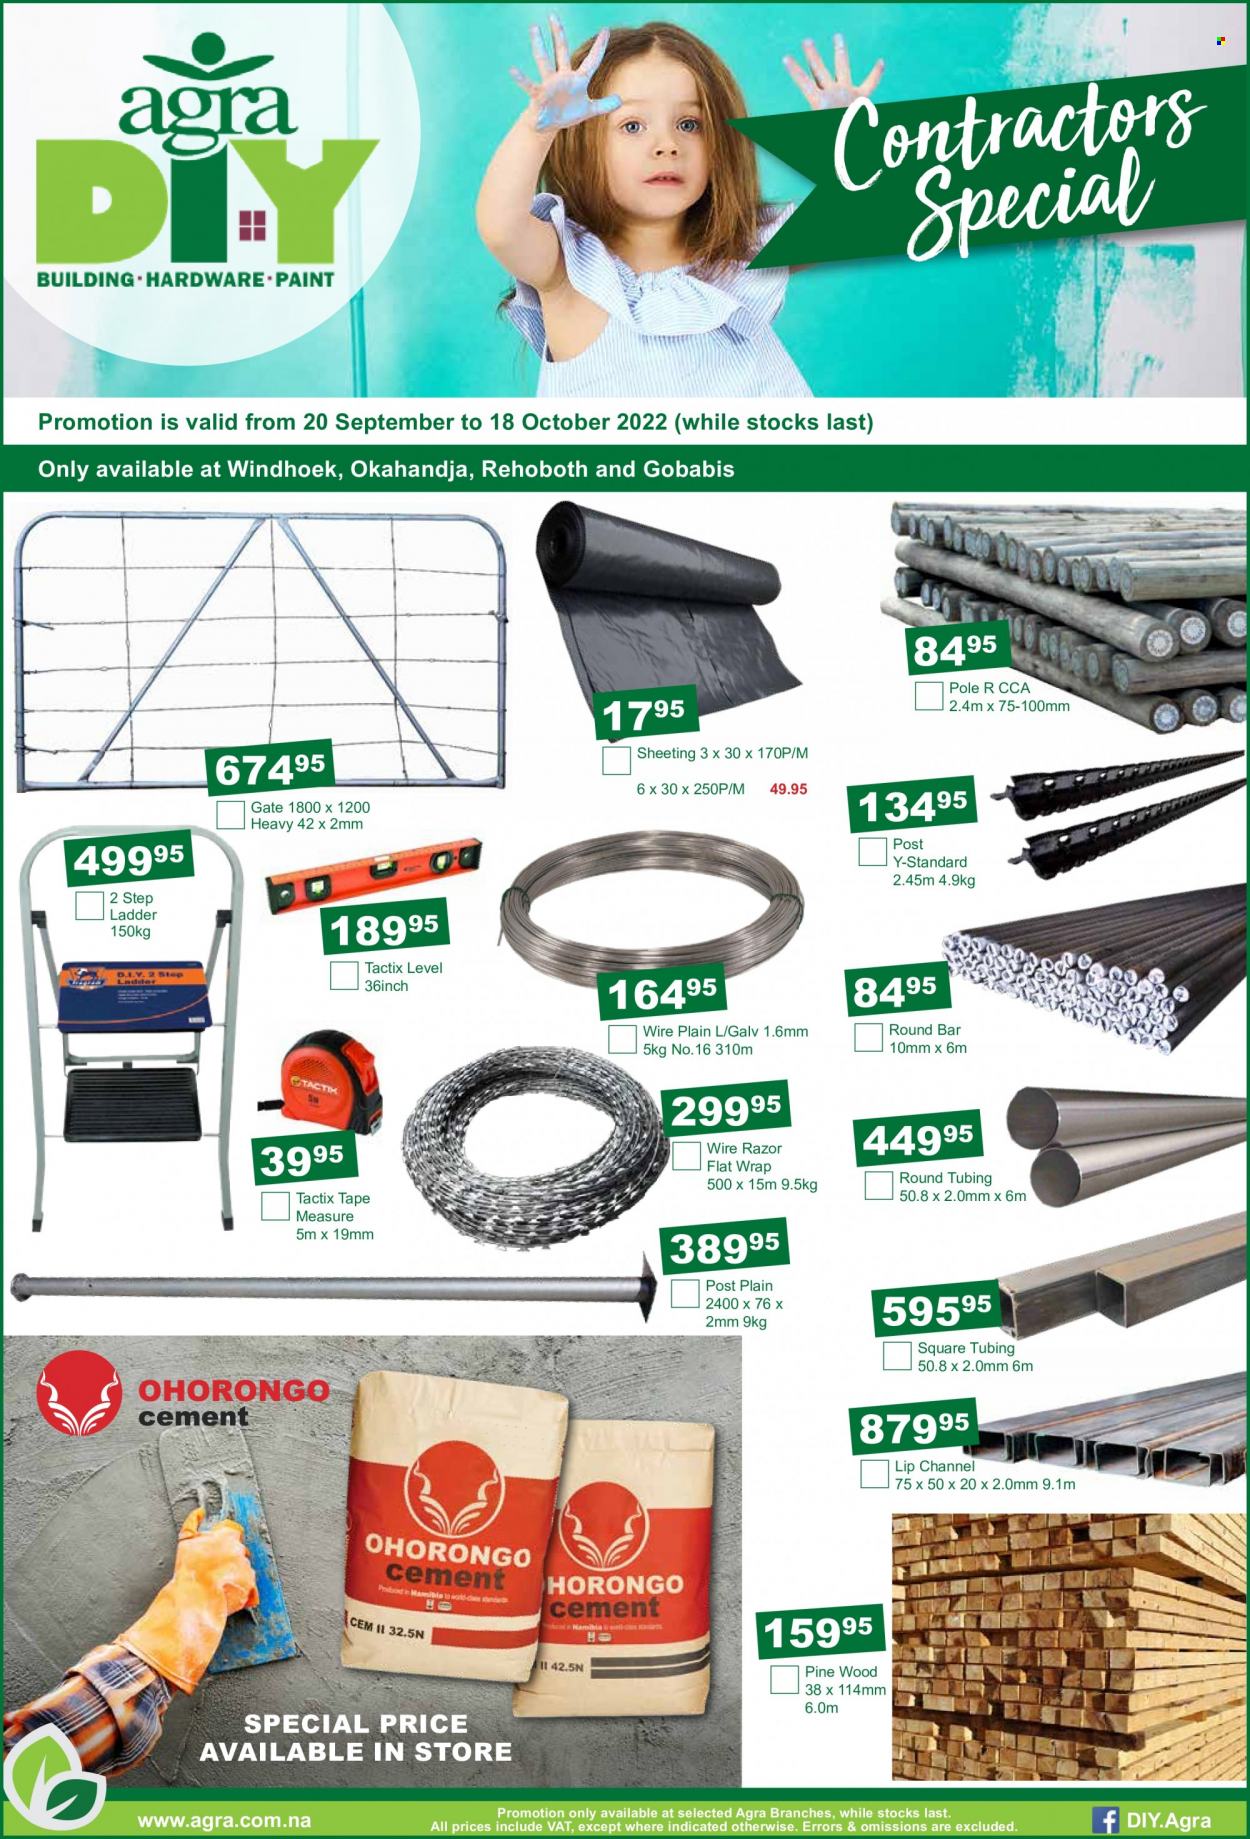 thumbnail - Agra catalogue  - 20/09/2022 - 18/10/2022 - Sales products - ladder, sheeting, paint, measuring tape. Page 2.